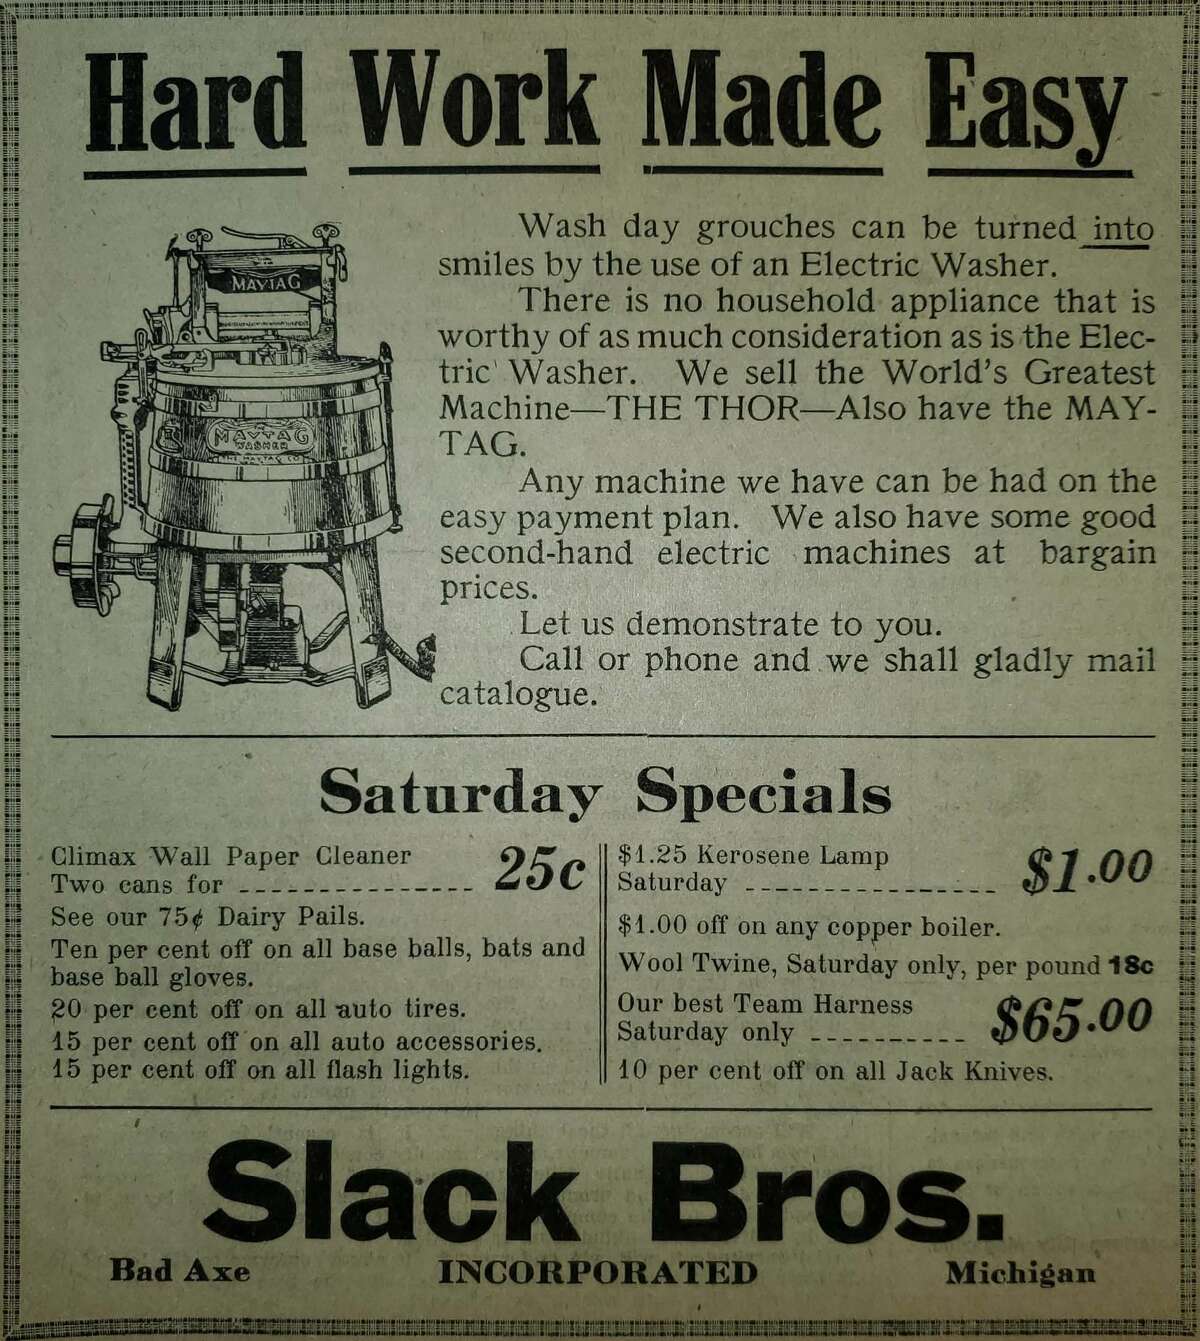 Slack Brothers proudly advertised that wash day grouches can be turned into smiles with an electric washer by Maytag.